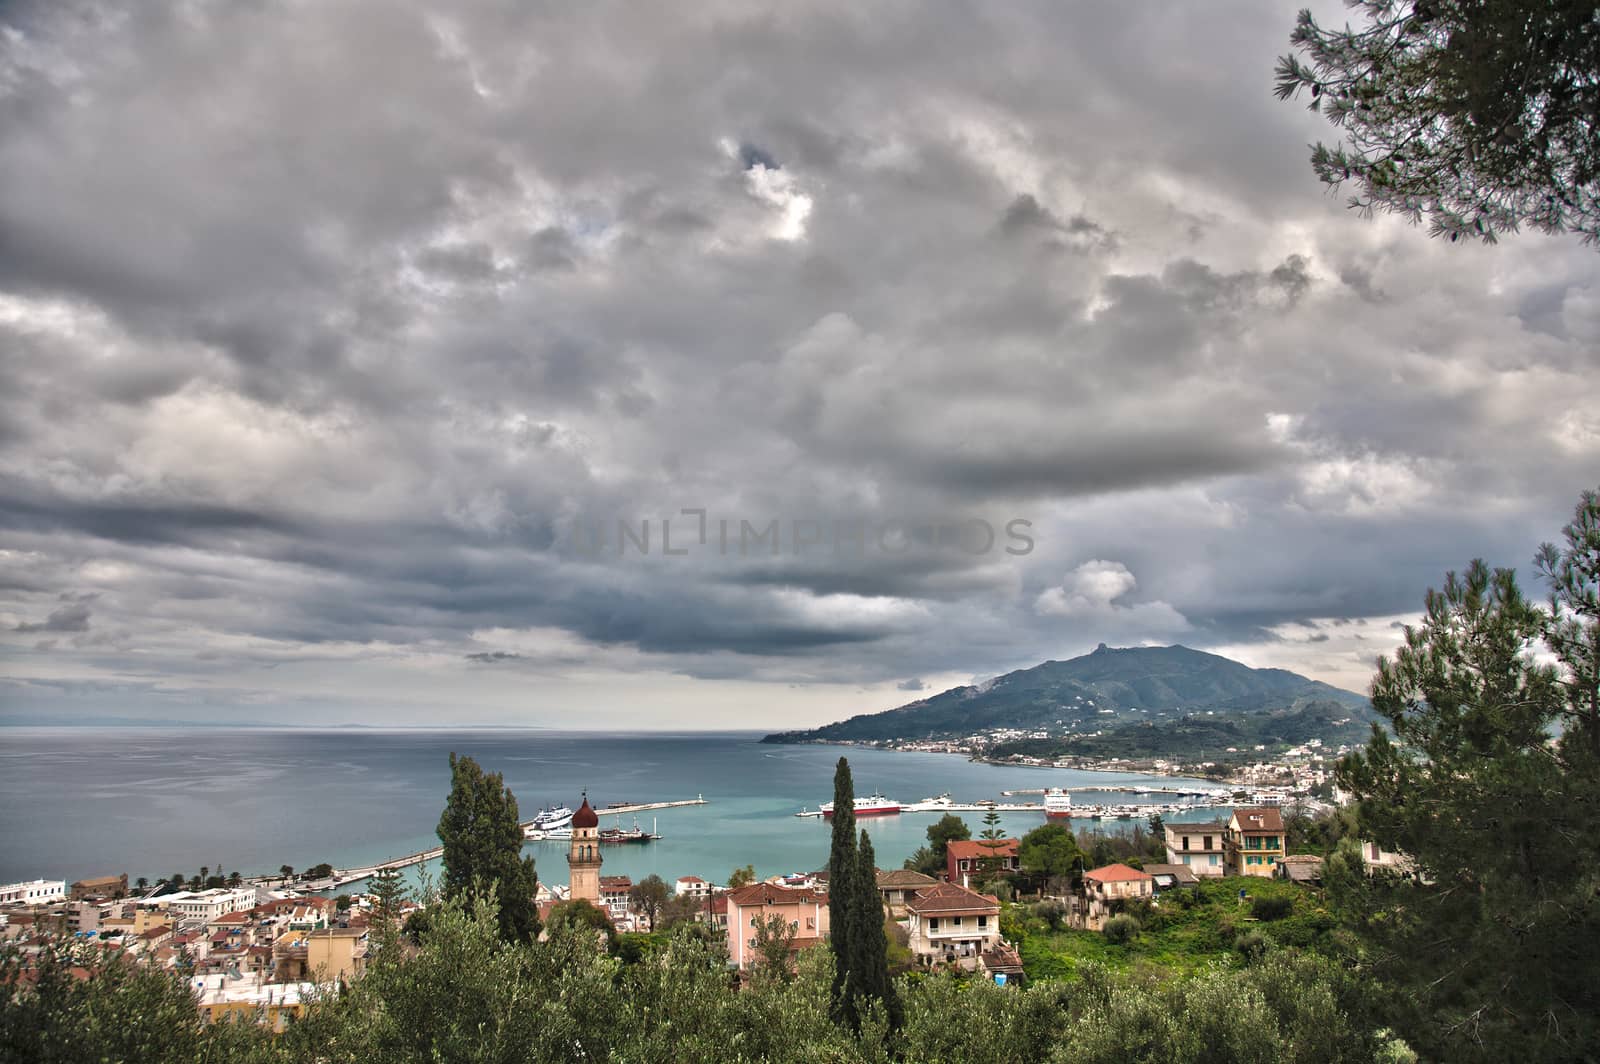 panoramic view of the city  of zante island with the port and the ionian sea 